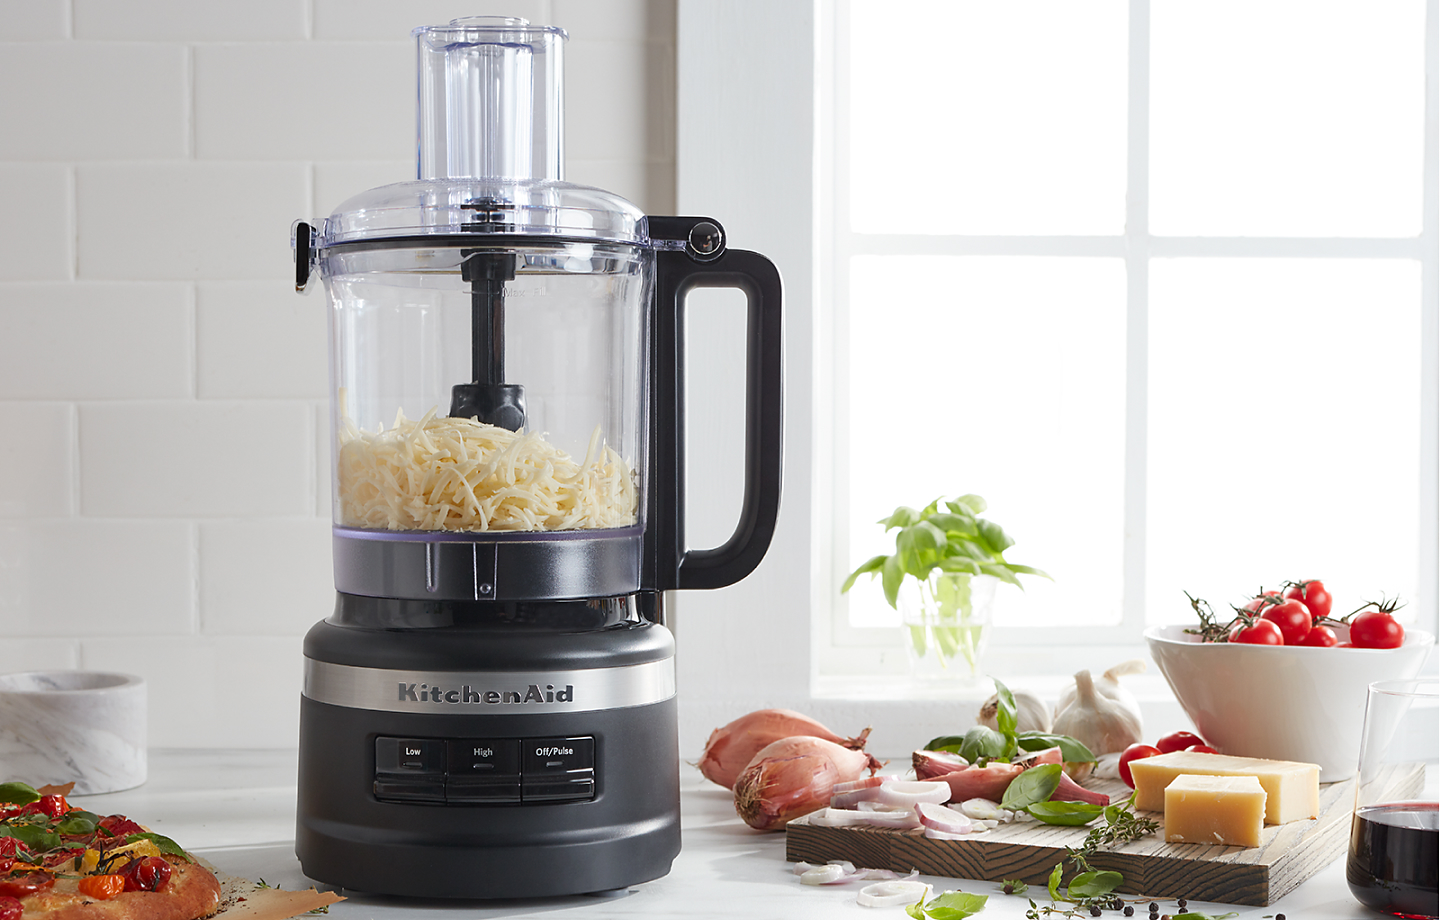 How To Grate Cheese In Your Food Processor